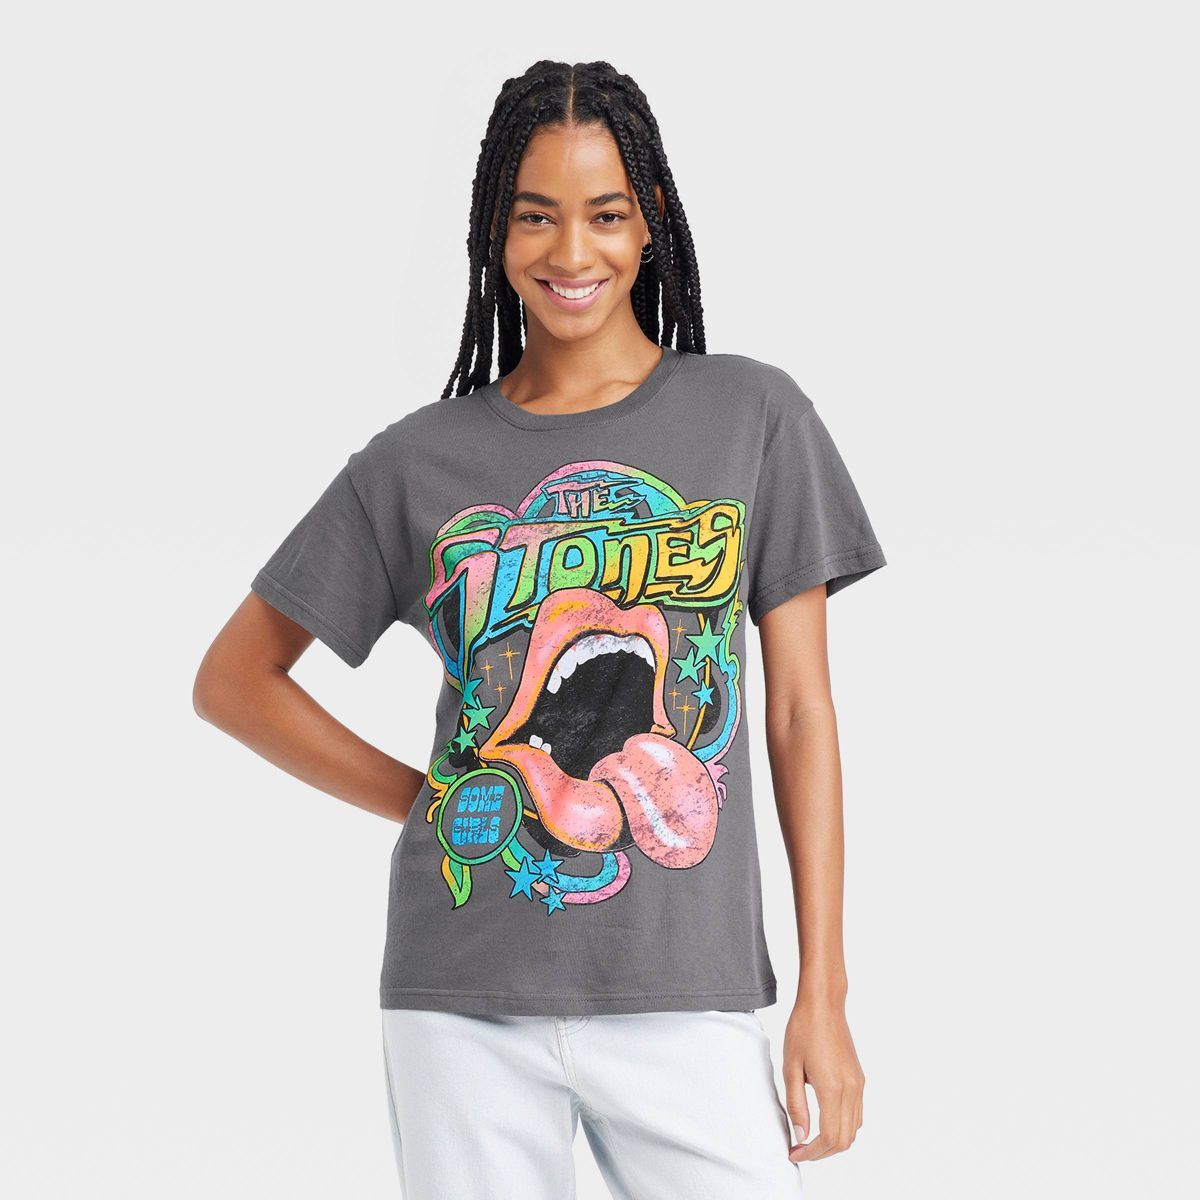 Women's The Rolling Stones Colorful Short Sleeve Graphic T-Shirt - Gray | Target